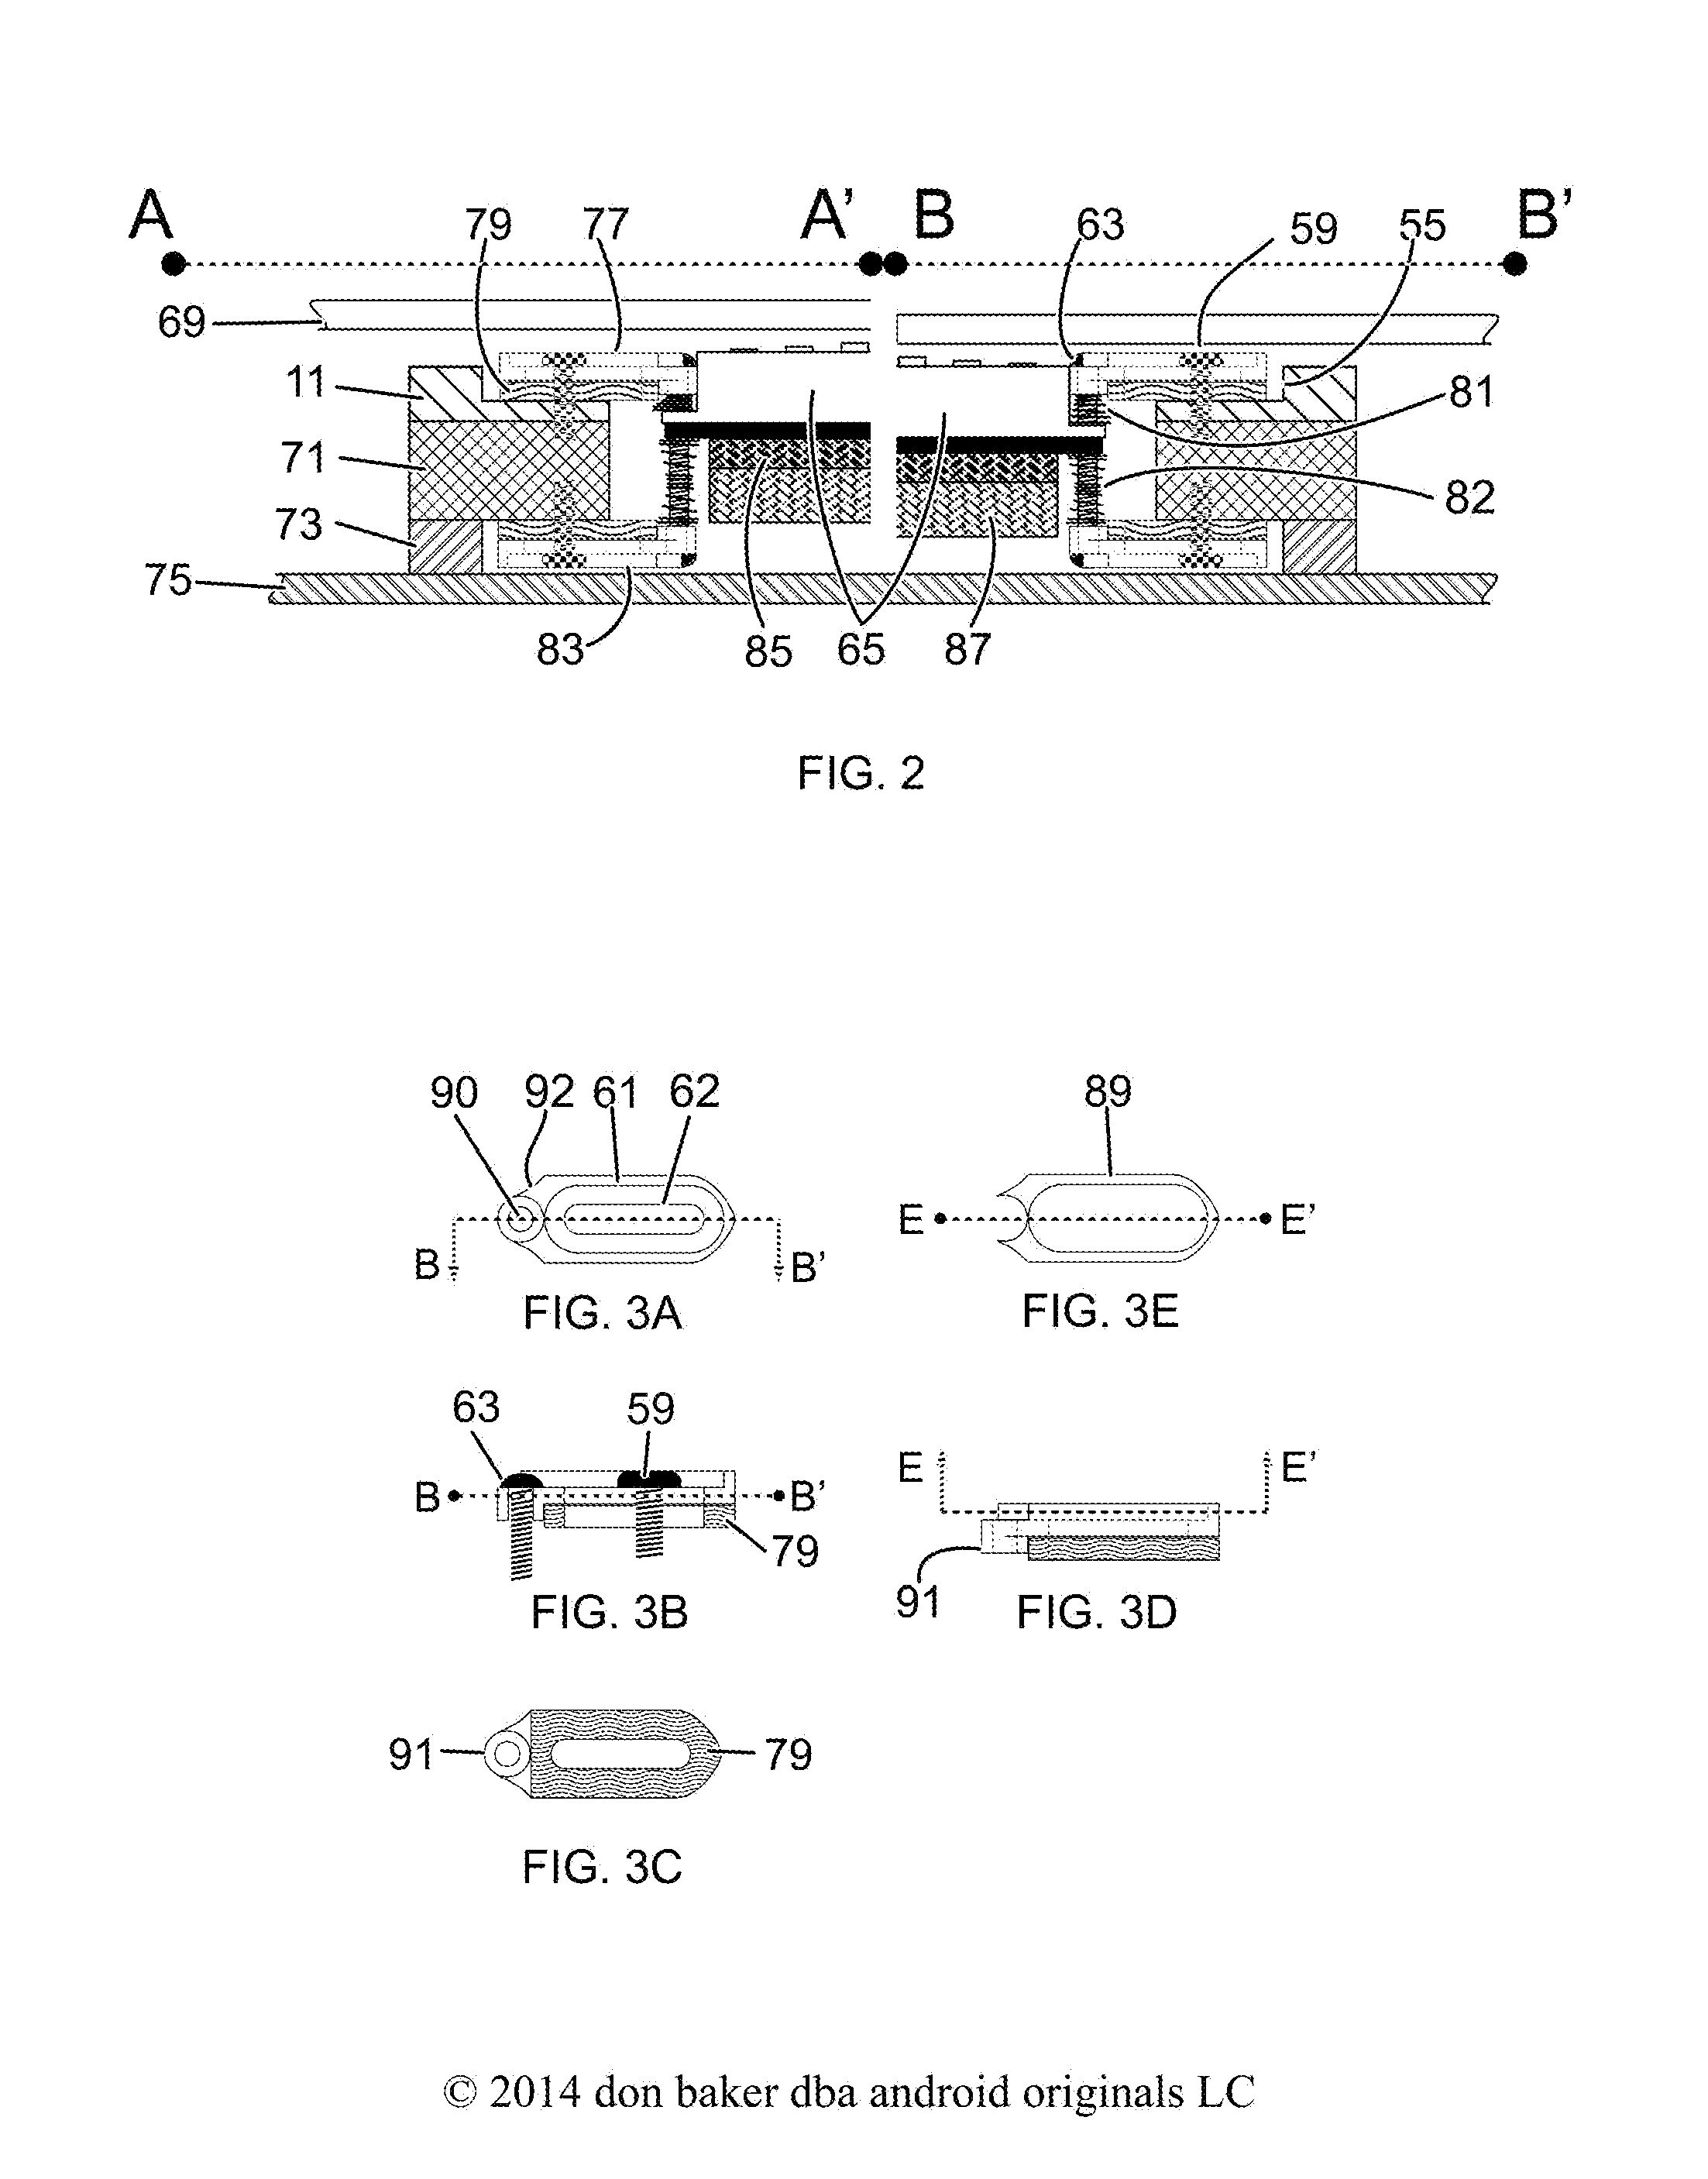 Acoustic-electric stringed instrument with improved body, electric pickup placement, pickup switching and electronic circuit